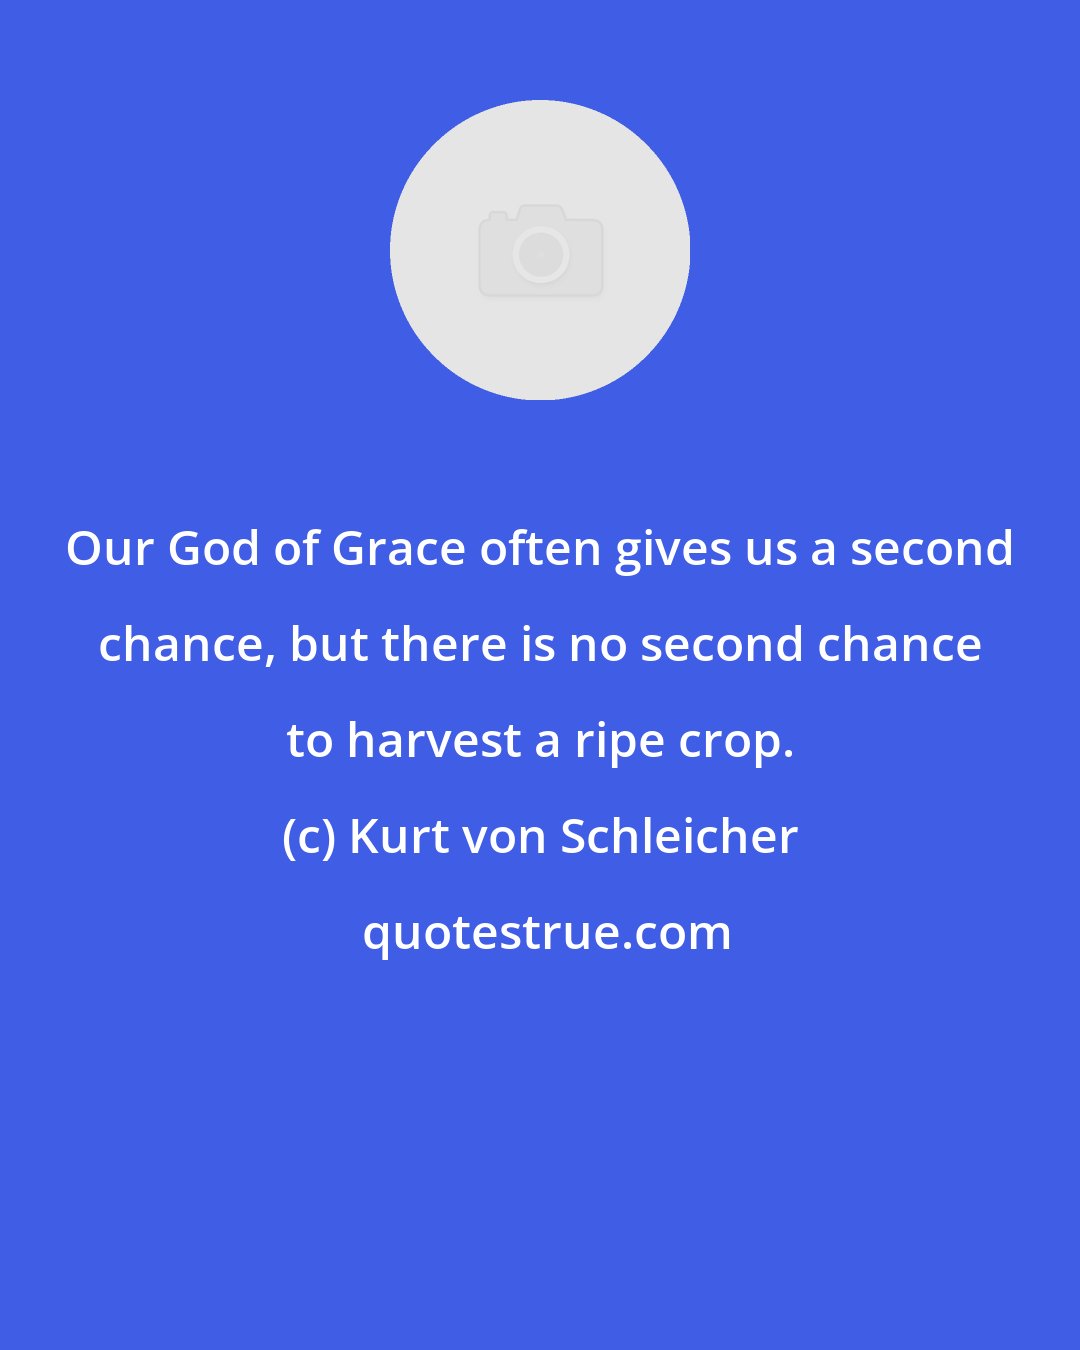 Kurt von Schleicher: Our God of Grace often gives us a second chance, but there is no second chance to harvest a ripe crop.